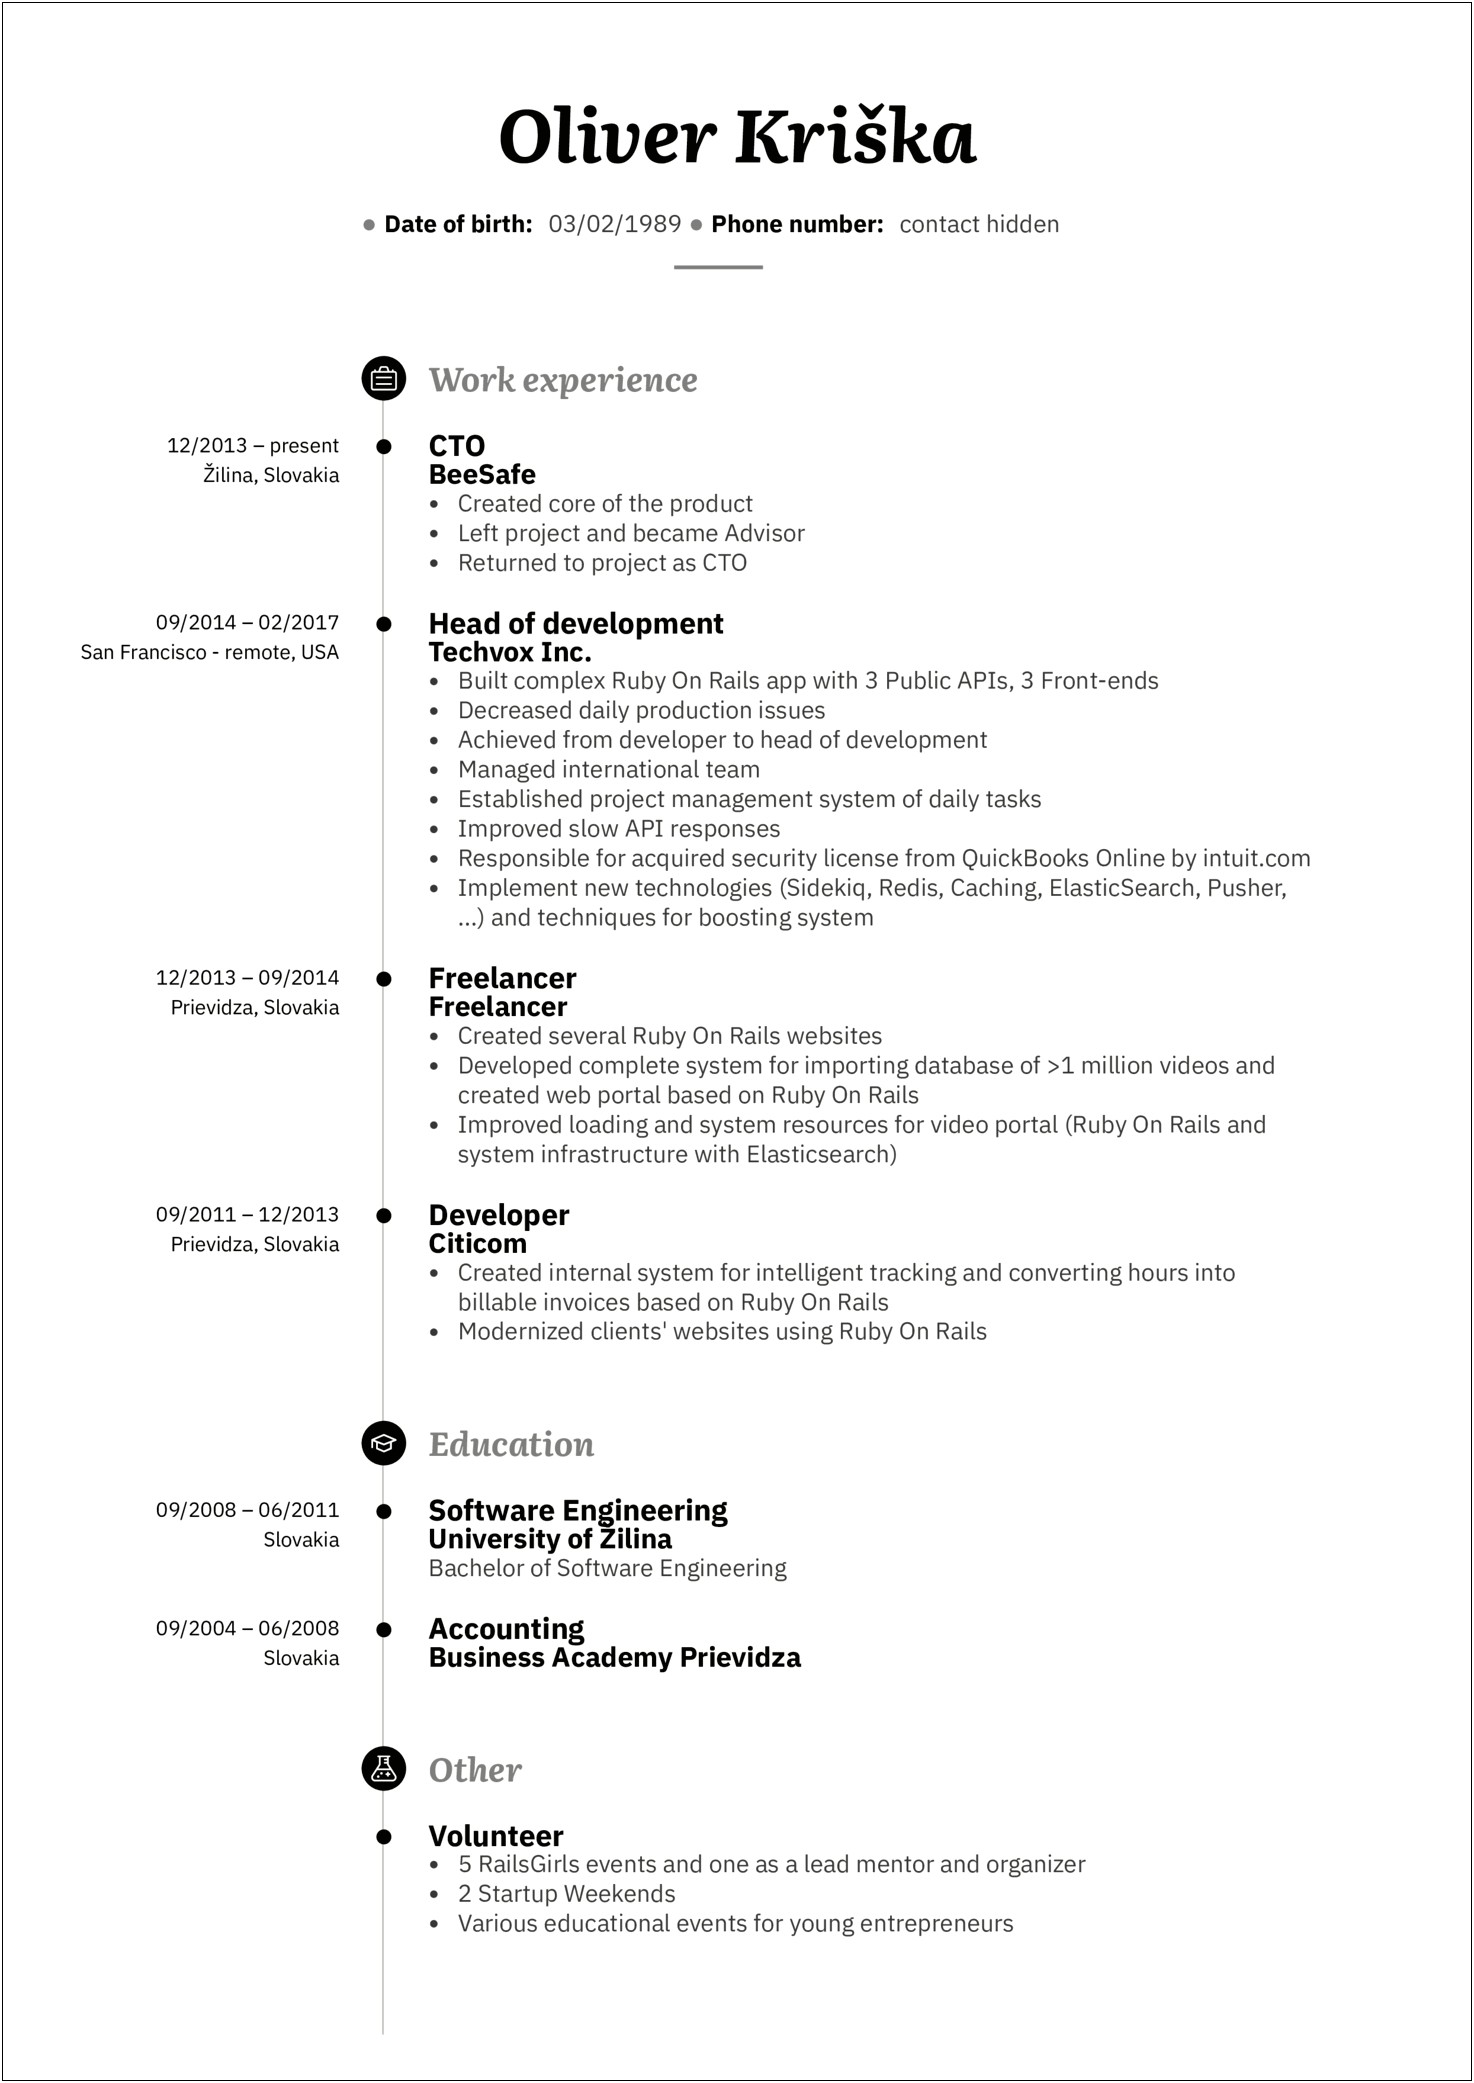 One Year Experience Resume For Web Developer